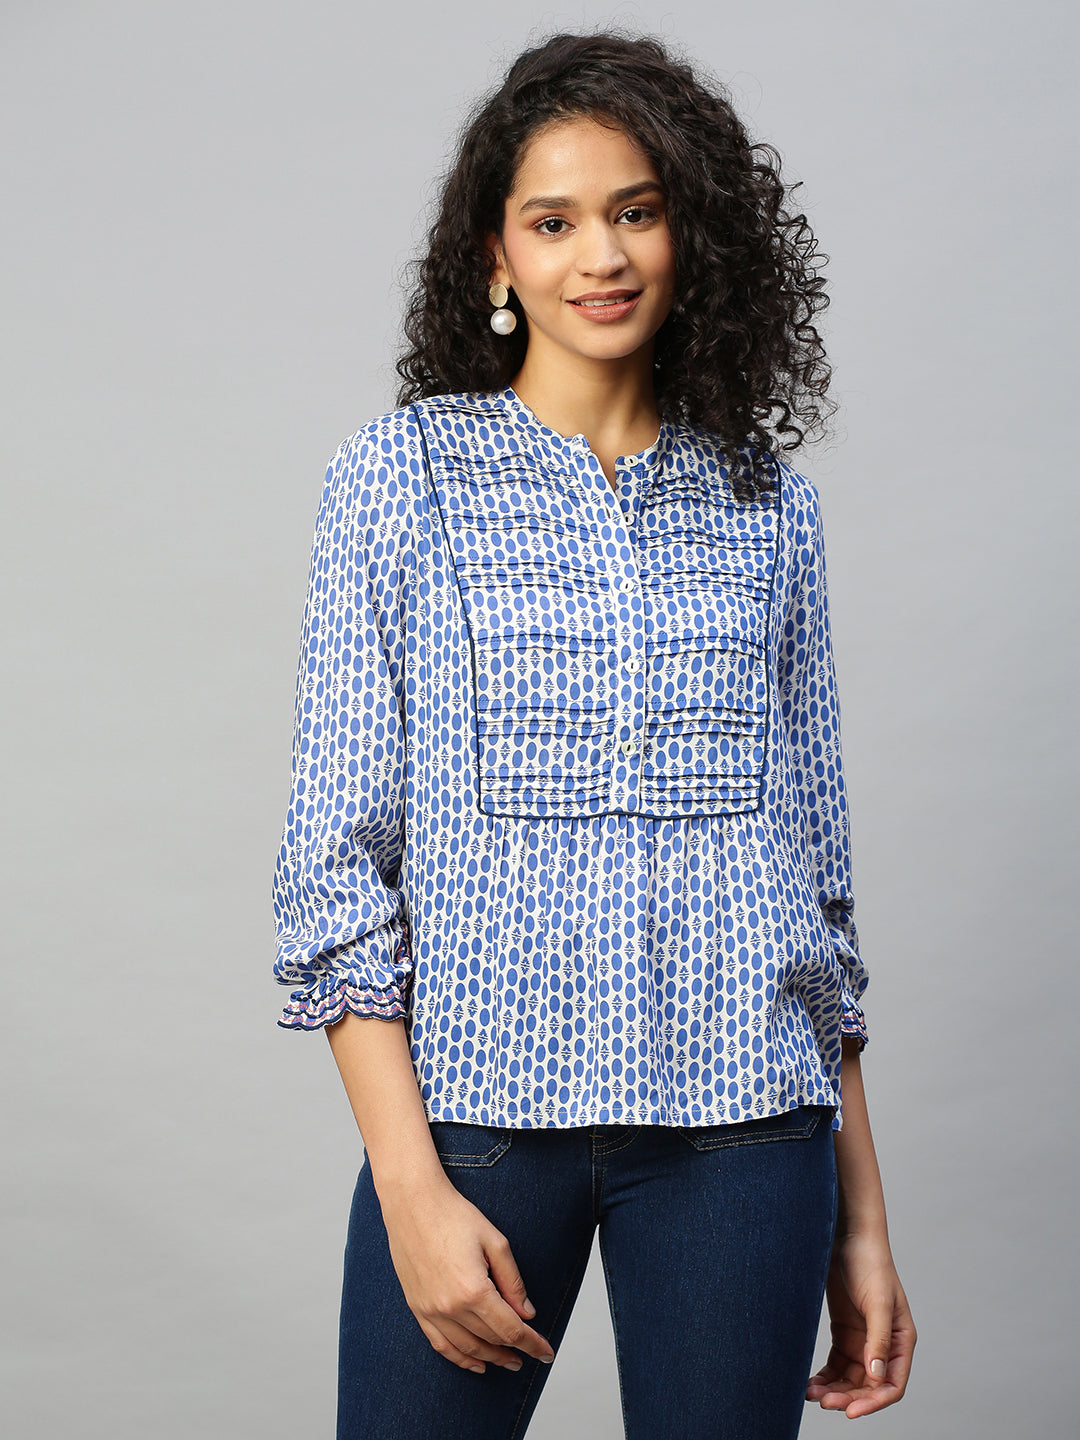 Dot Printed Rayon, Detailed Yoke Tunic Top W Scalloped Embroidered Cuff